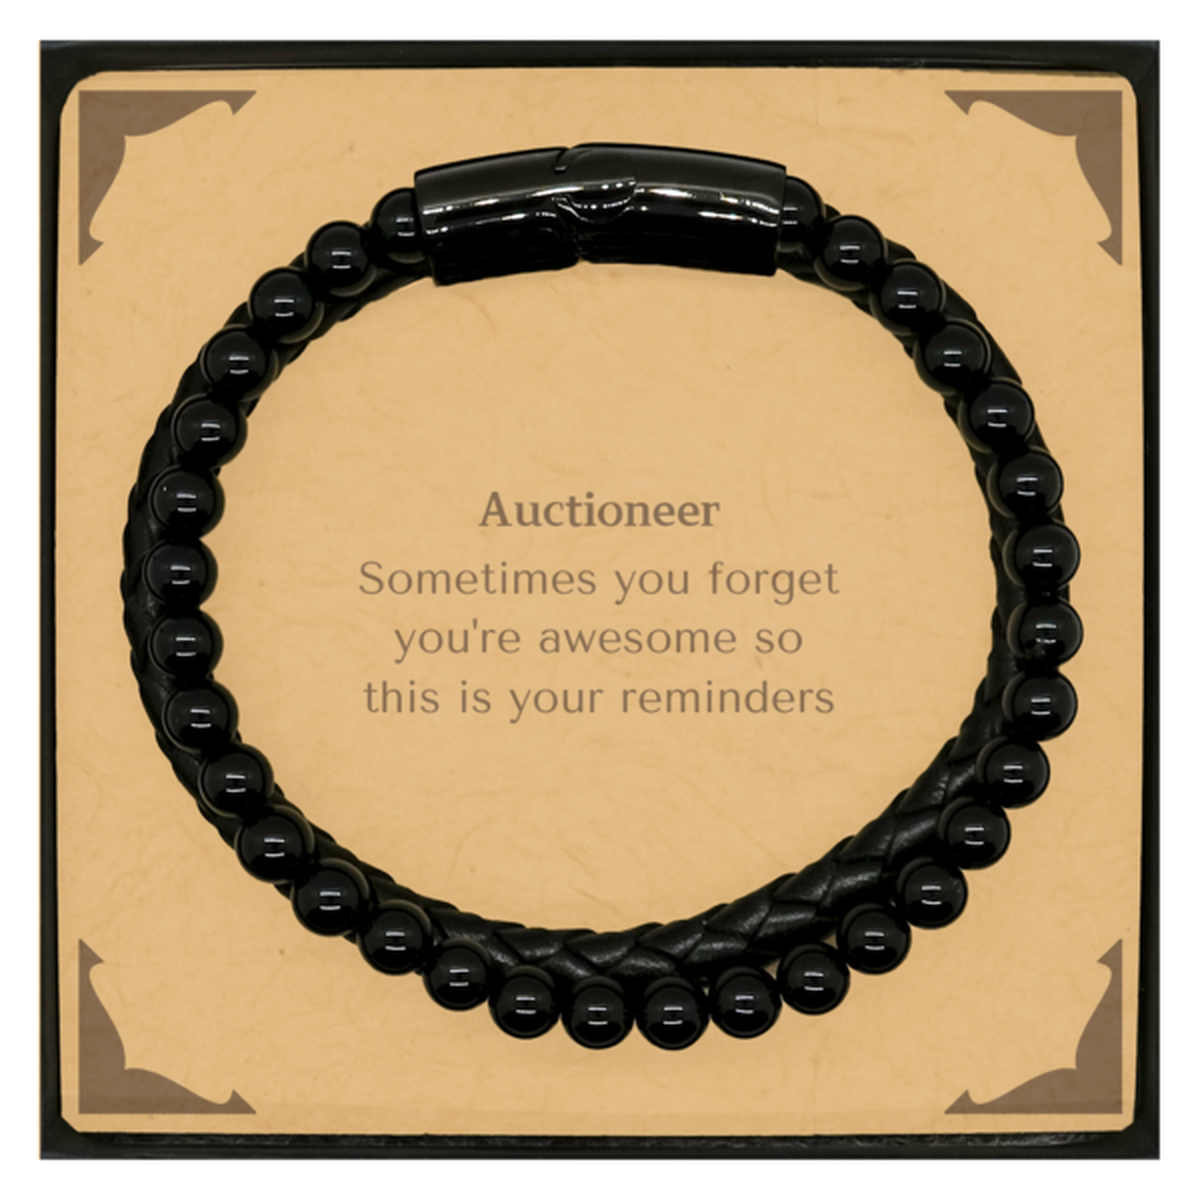 Sentimental Auctioneer Stone Leather Bracelets, Auctioneer Sometimes you forget you're awesome so this is your reminders, Graduation Christmas Birthday Gifts for Auctioneer, Men, Women, Coworkers